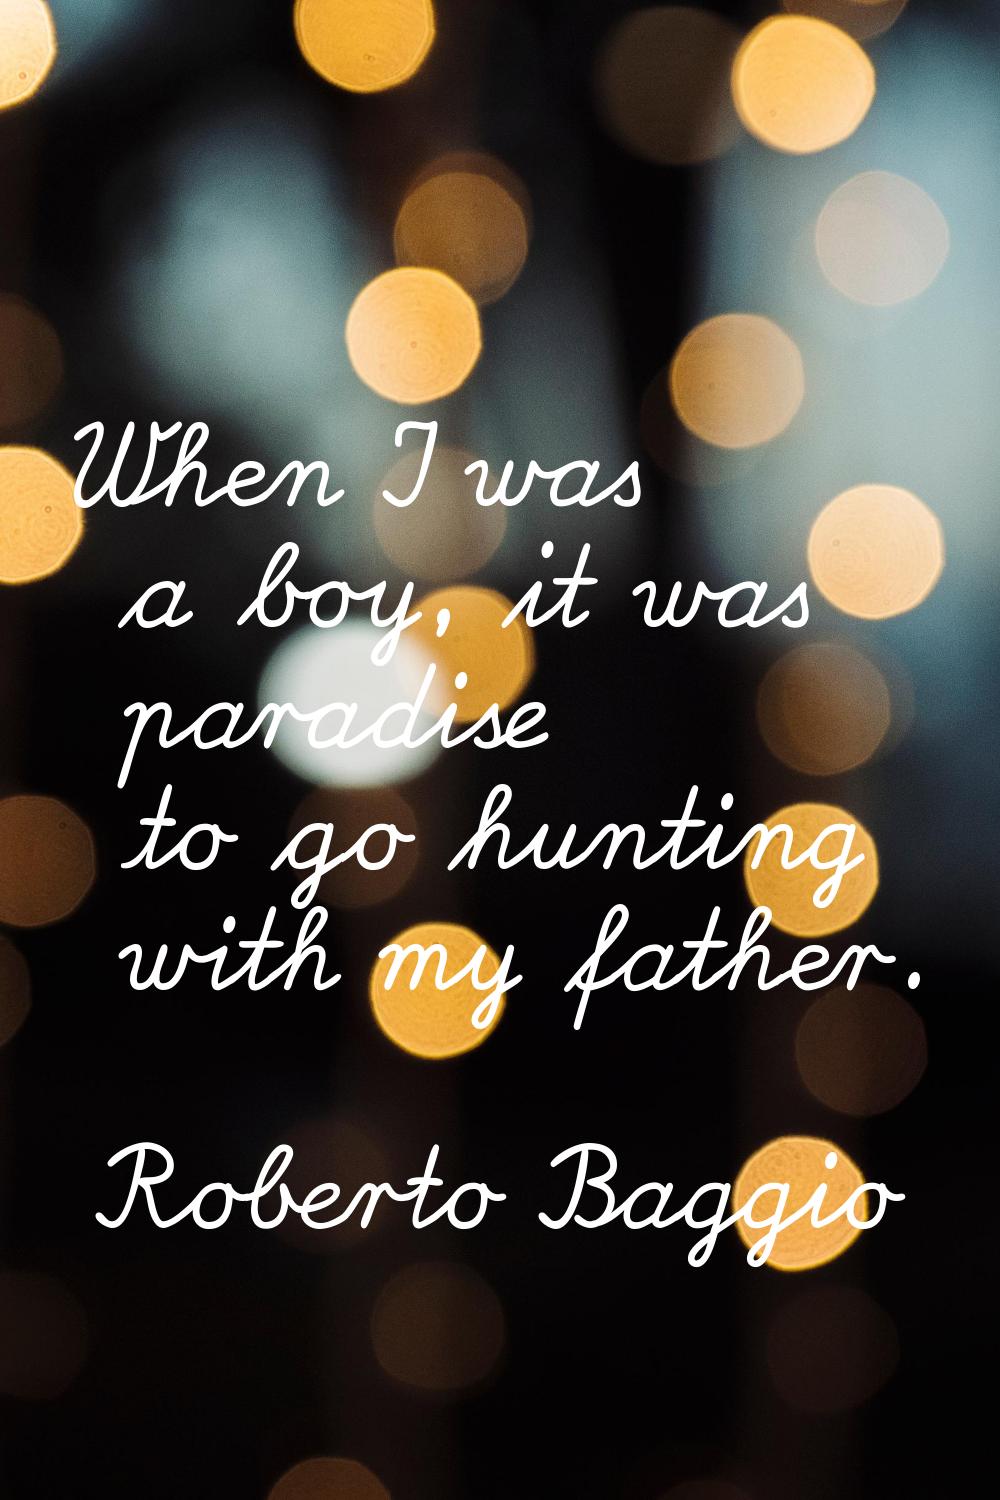 When I was a boy, it was paradise to go hunting with my father.